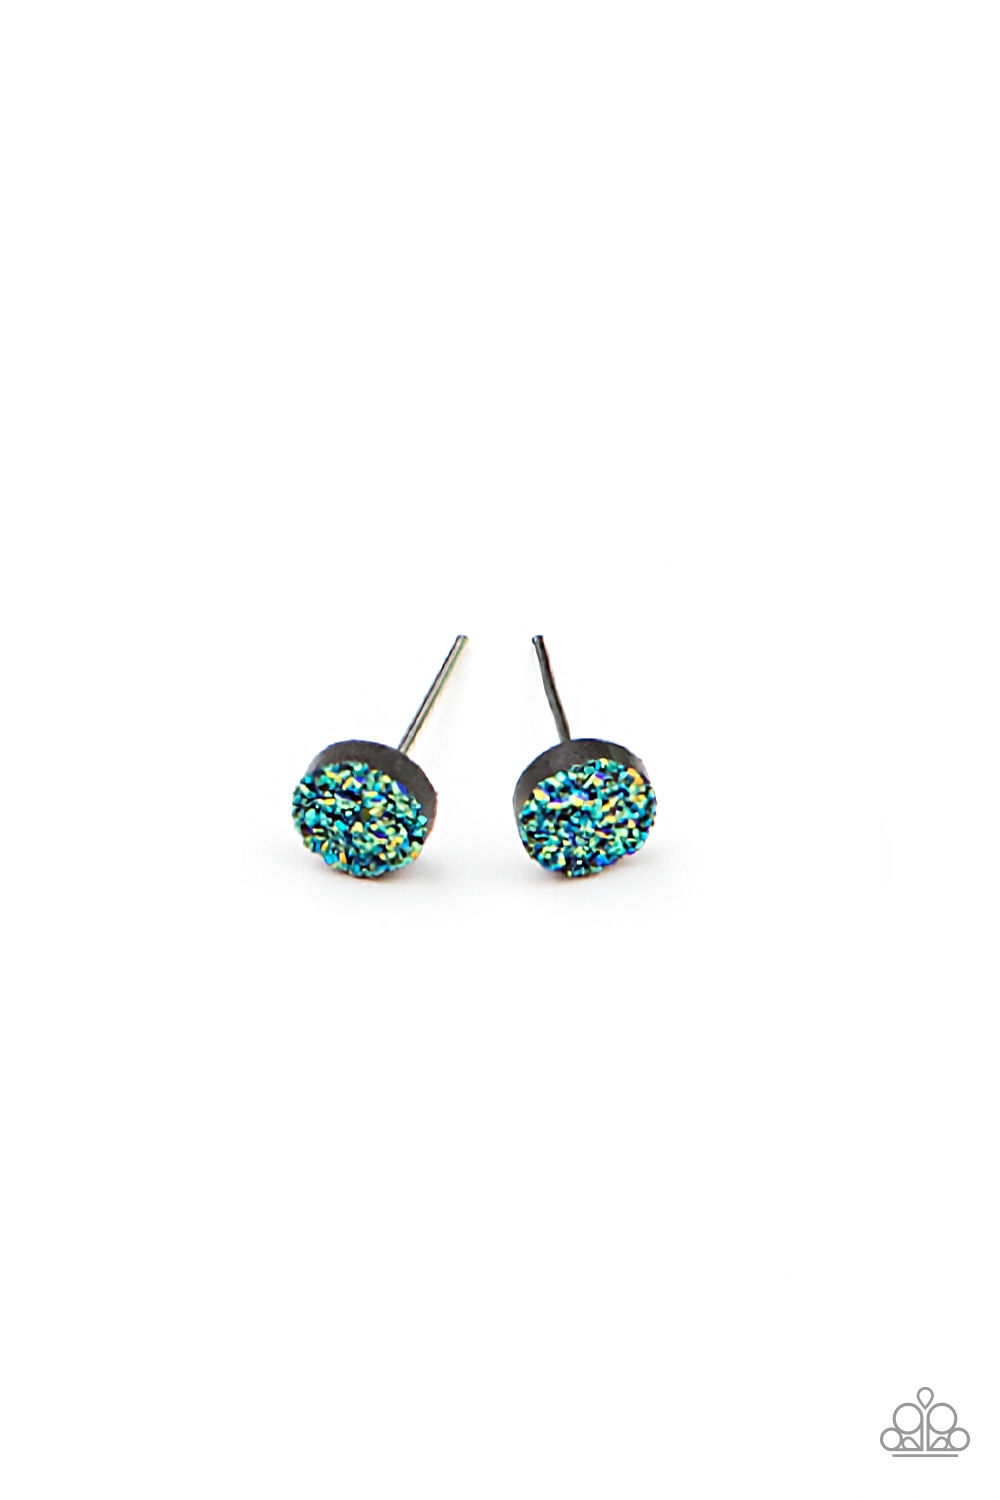 Earring - Starlet Shimmer Under the Sea - Iridescent Accent